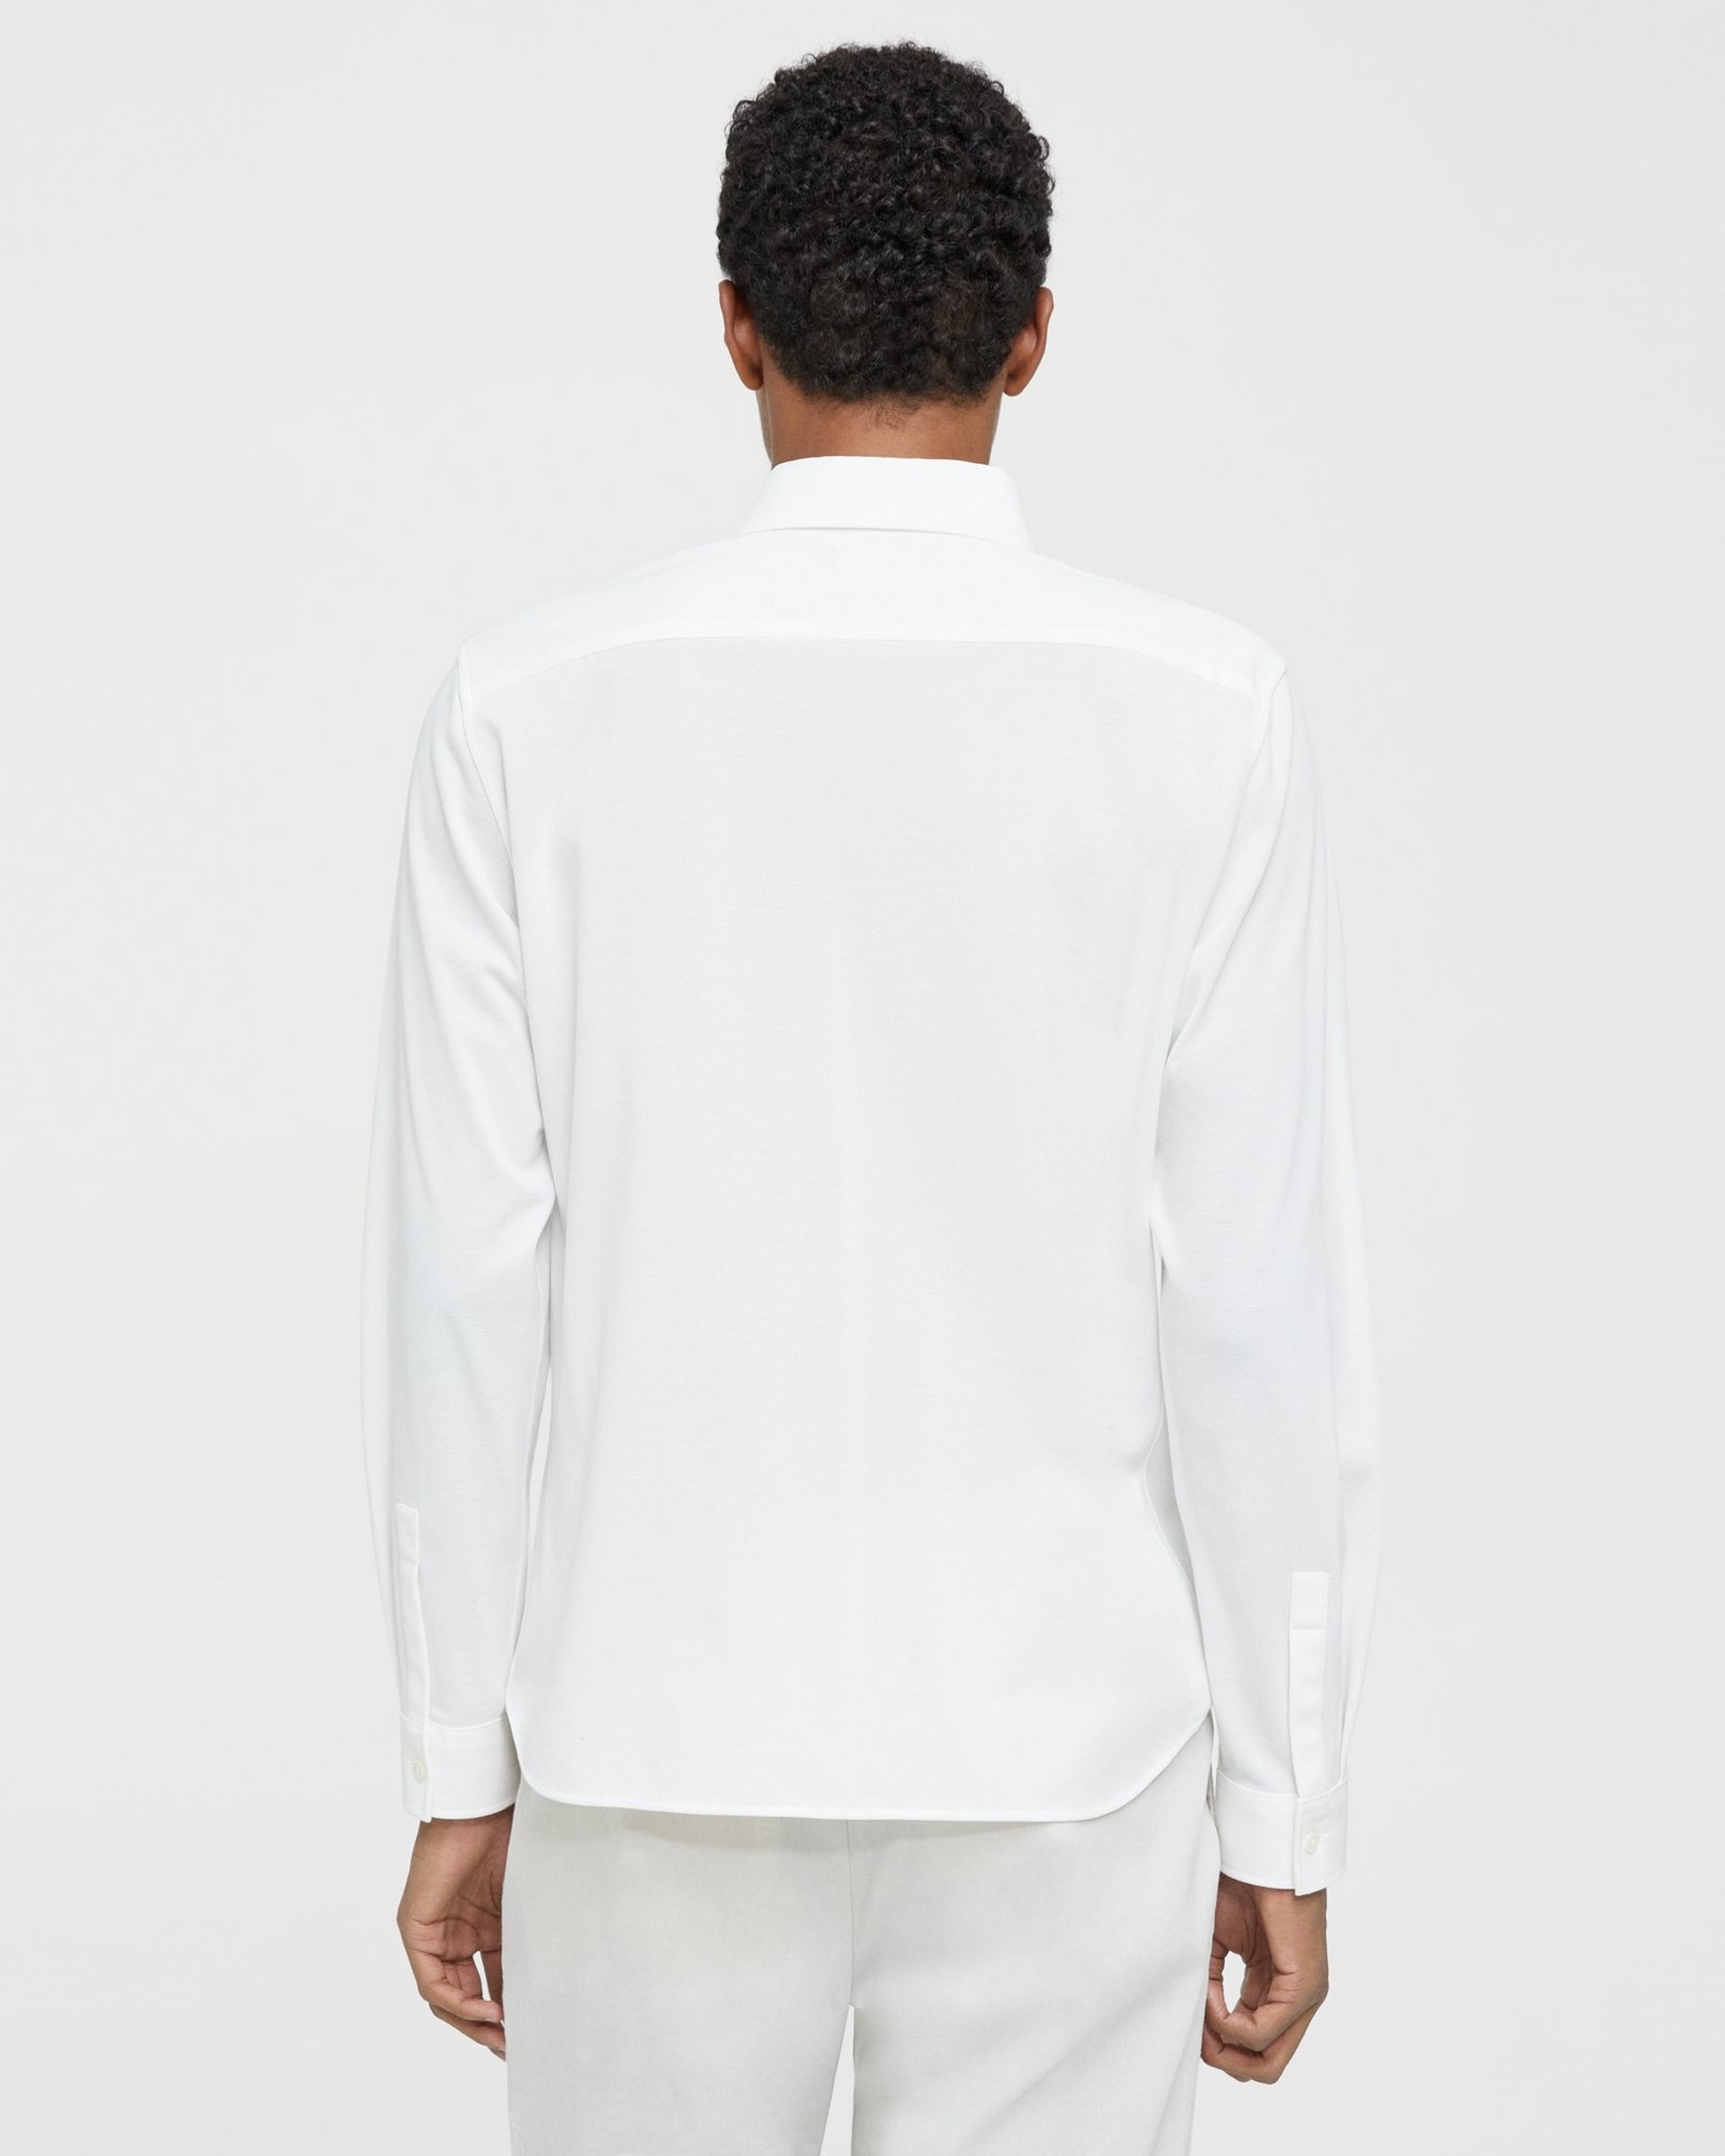 Alfred Shirt in Structured Piqué